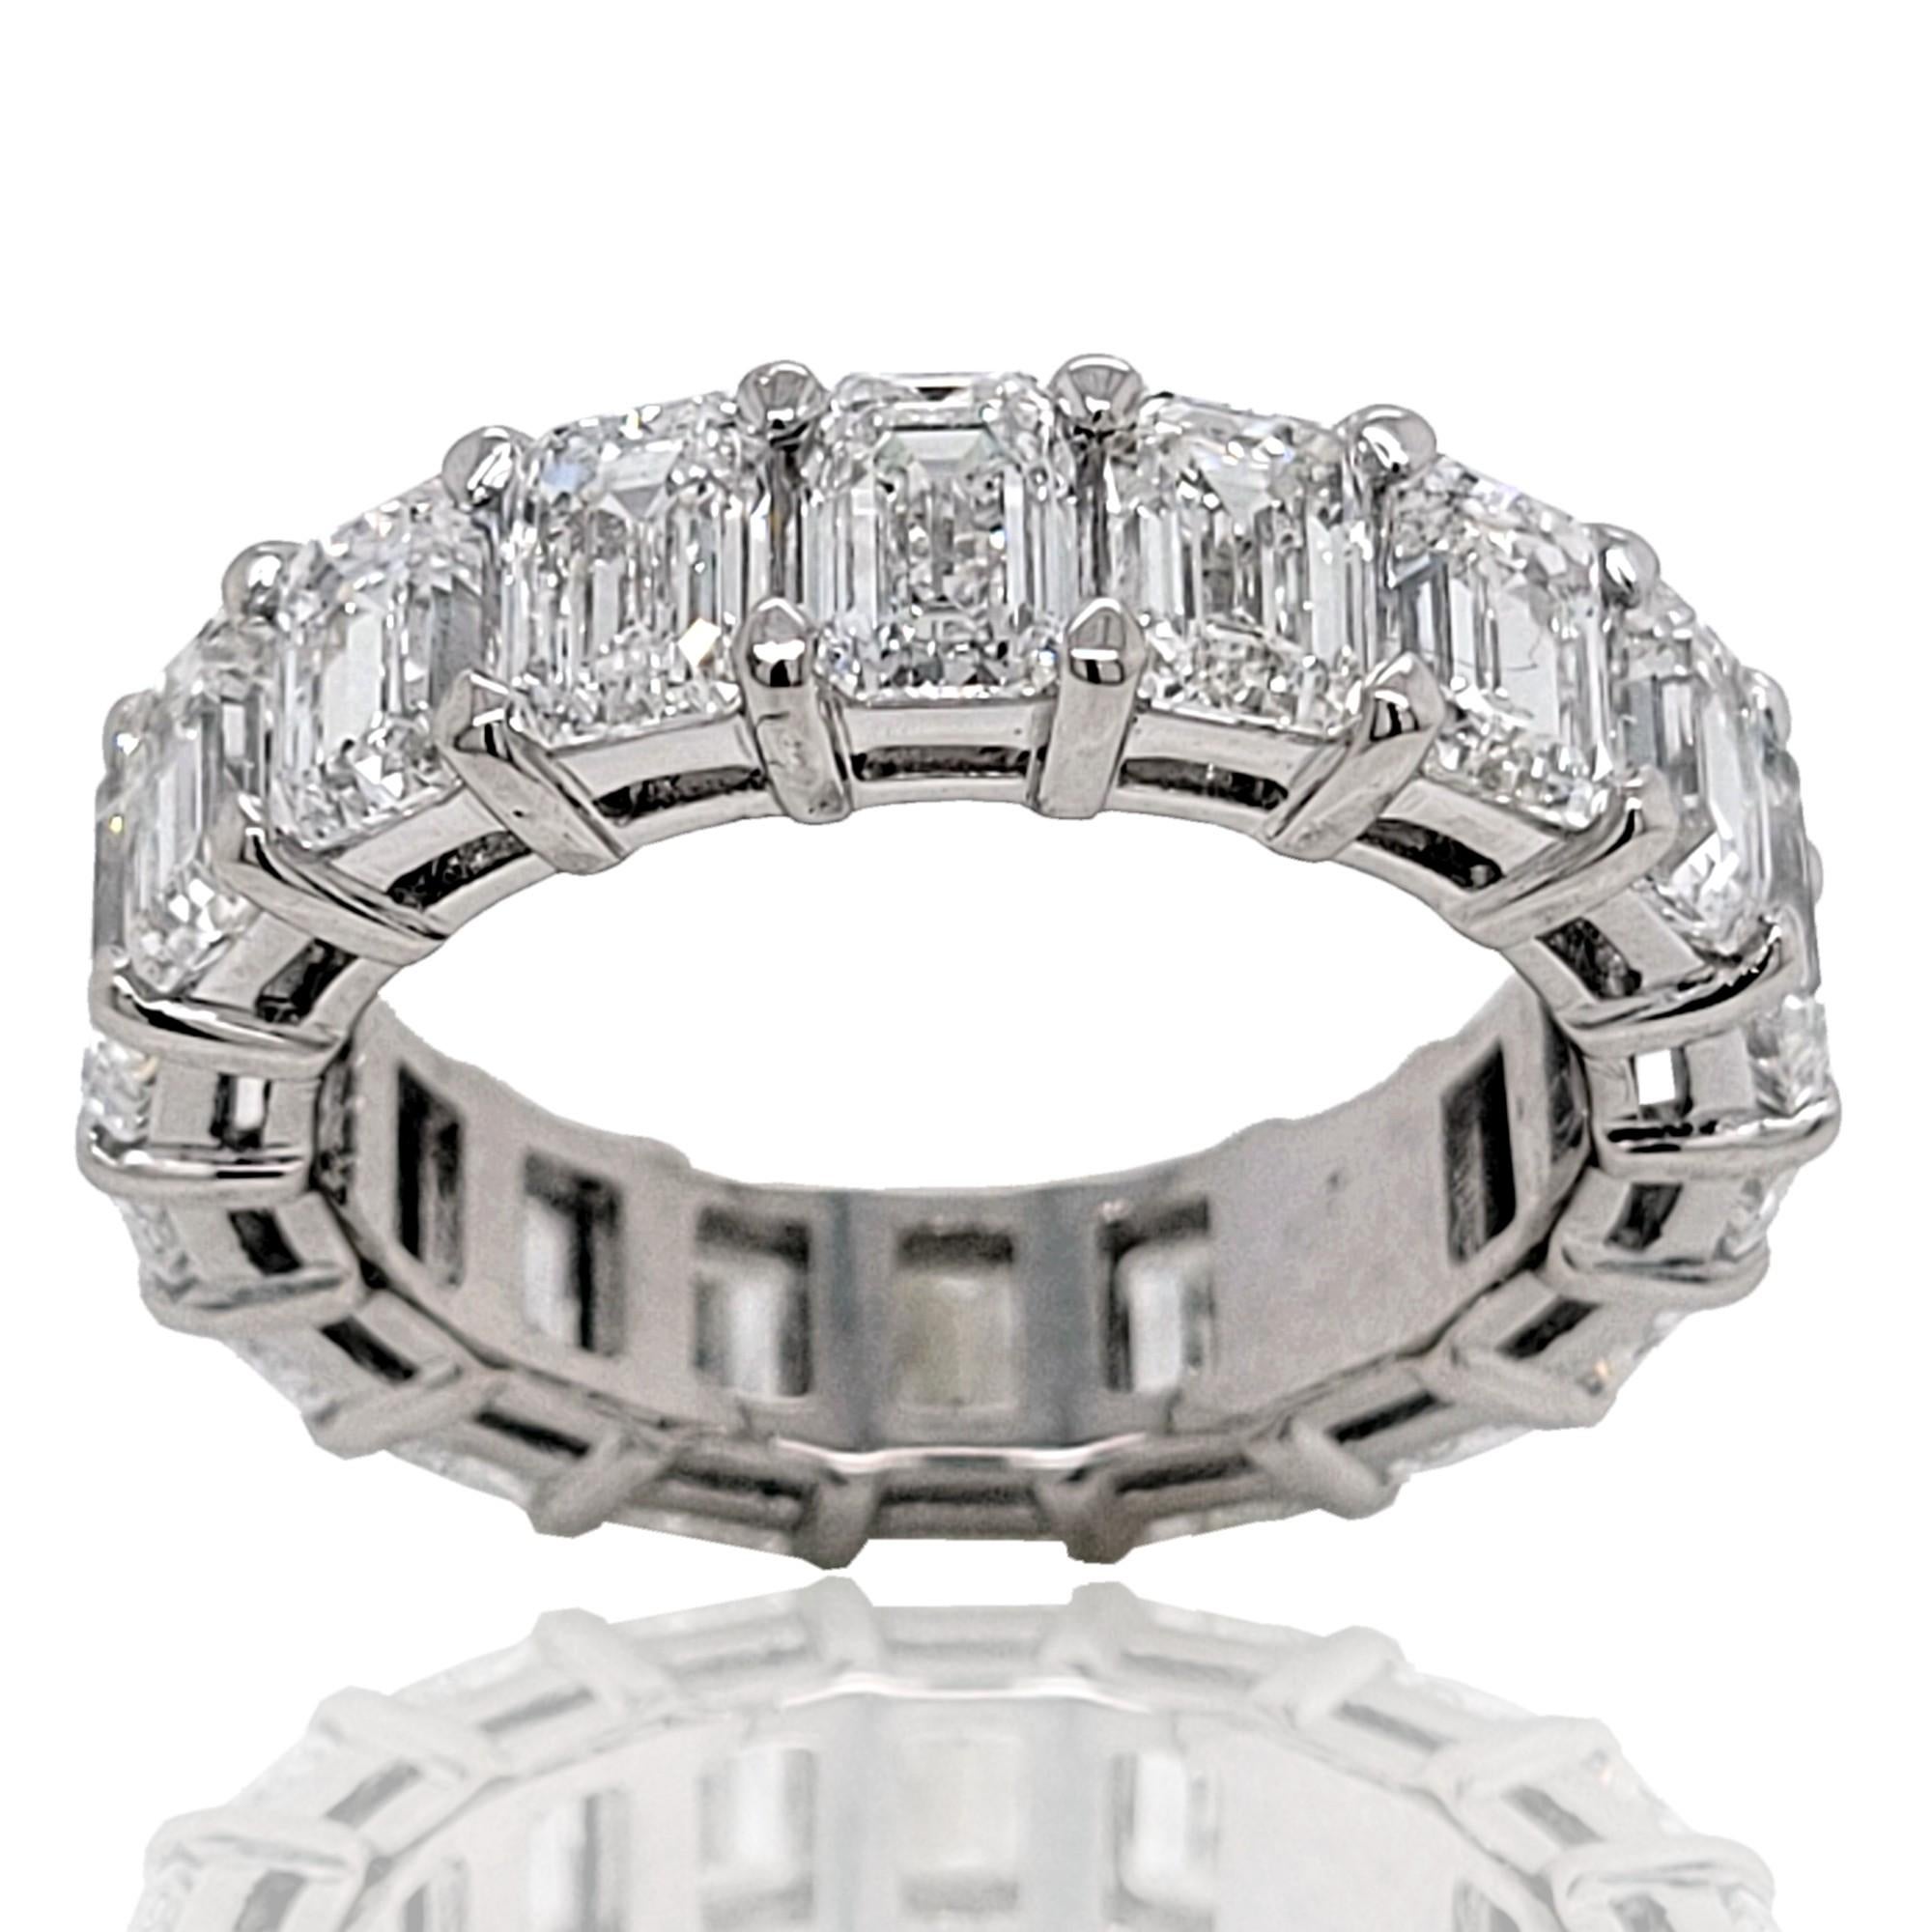 This beautiful Eternity Ring is made of Platinum showcasing 18 perfectly matched GIA Certified  (VVS/D-F)  0.40 Ct Emerald Cut Diamonds Set in Shared Prong Mode.
1 diamond is D color, 4 diamonds are E Color and 13 are F Color.
7 diamonds are VVS1